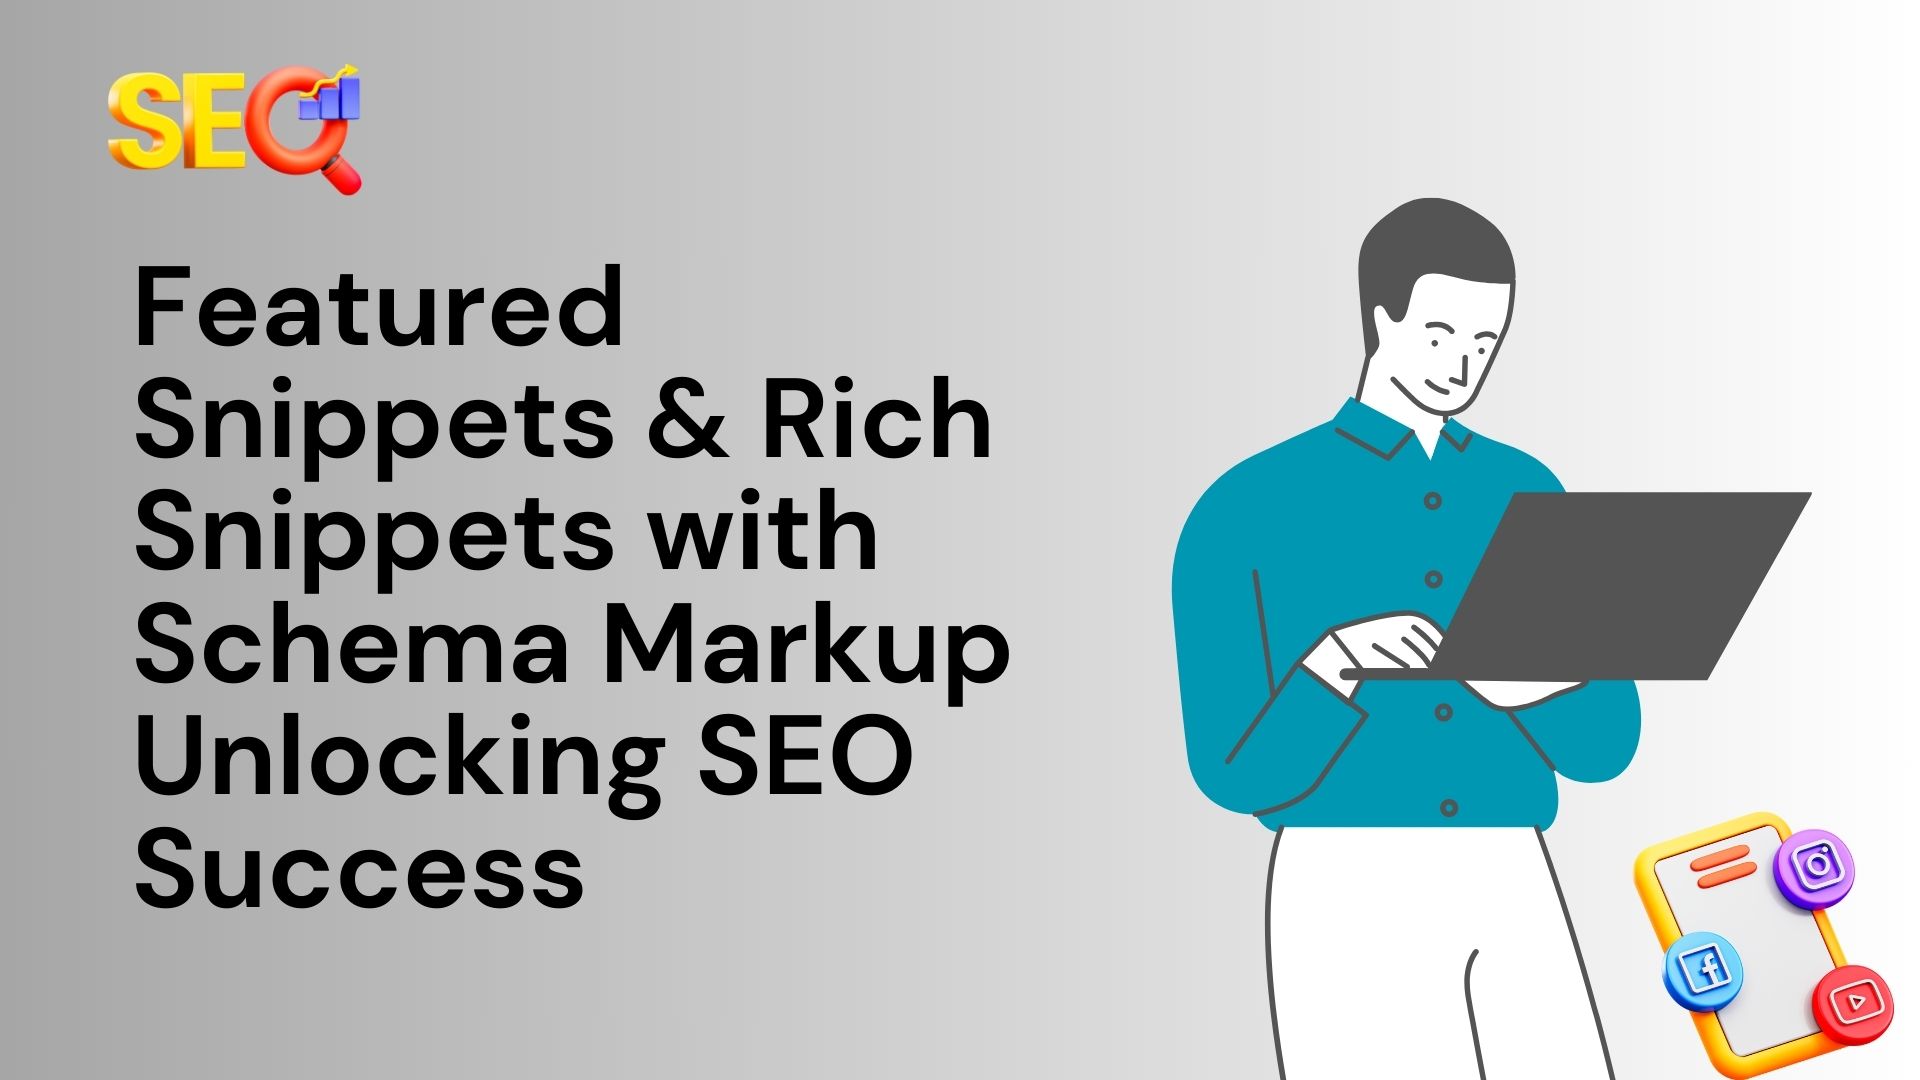 Featured Snippets & Rich Snippets with Schema Markup - Unlocking SEO Success